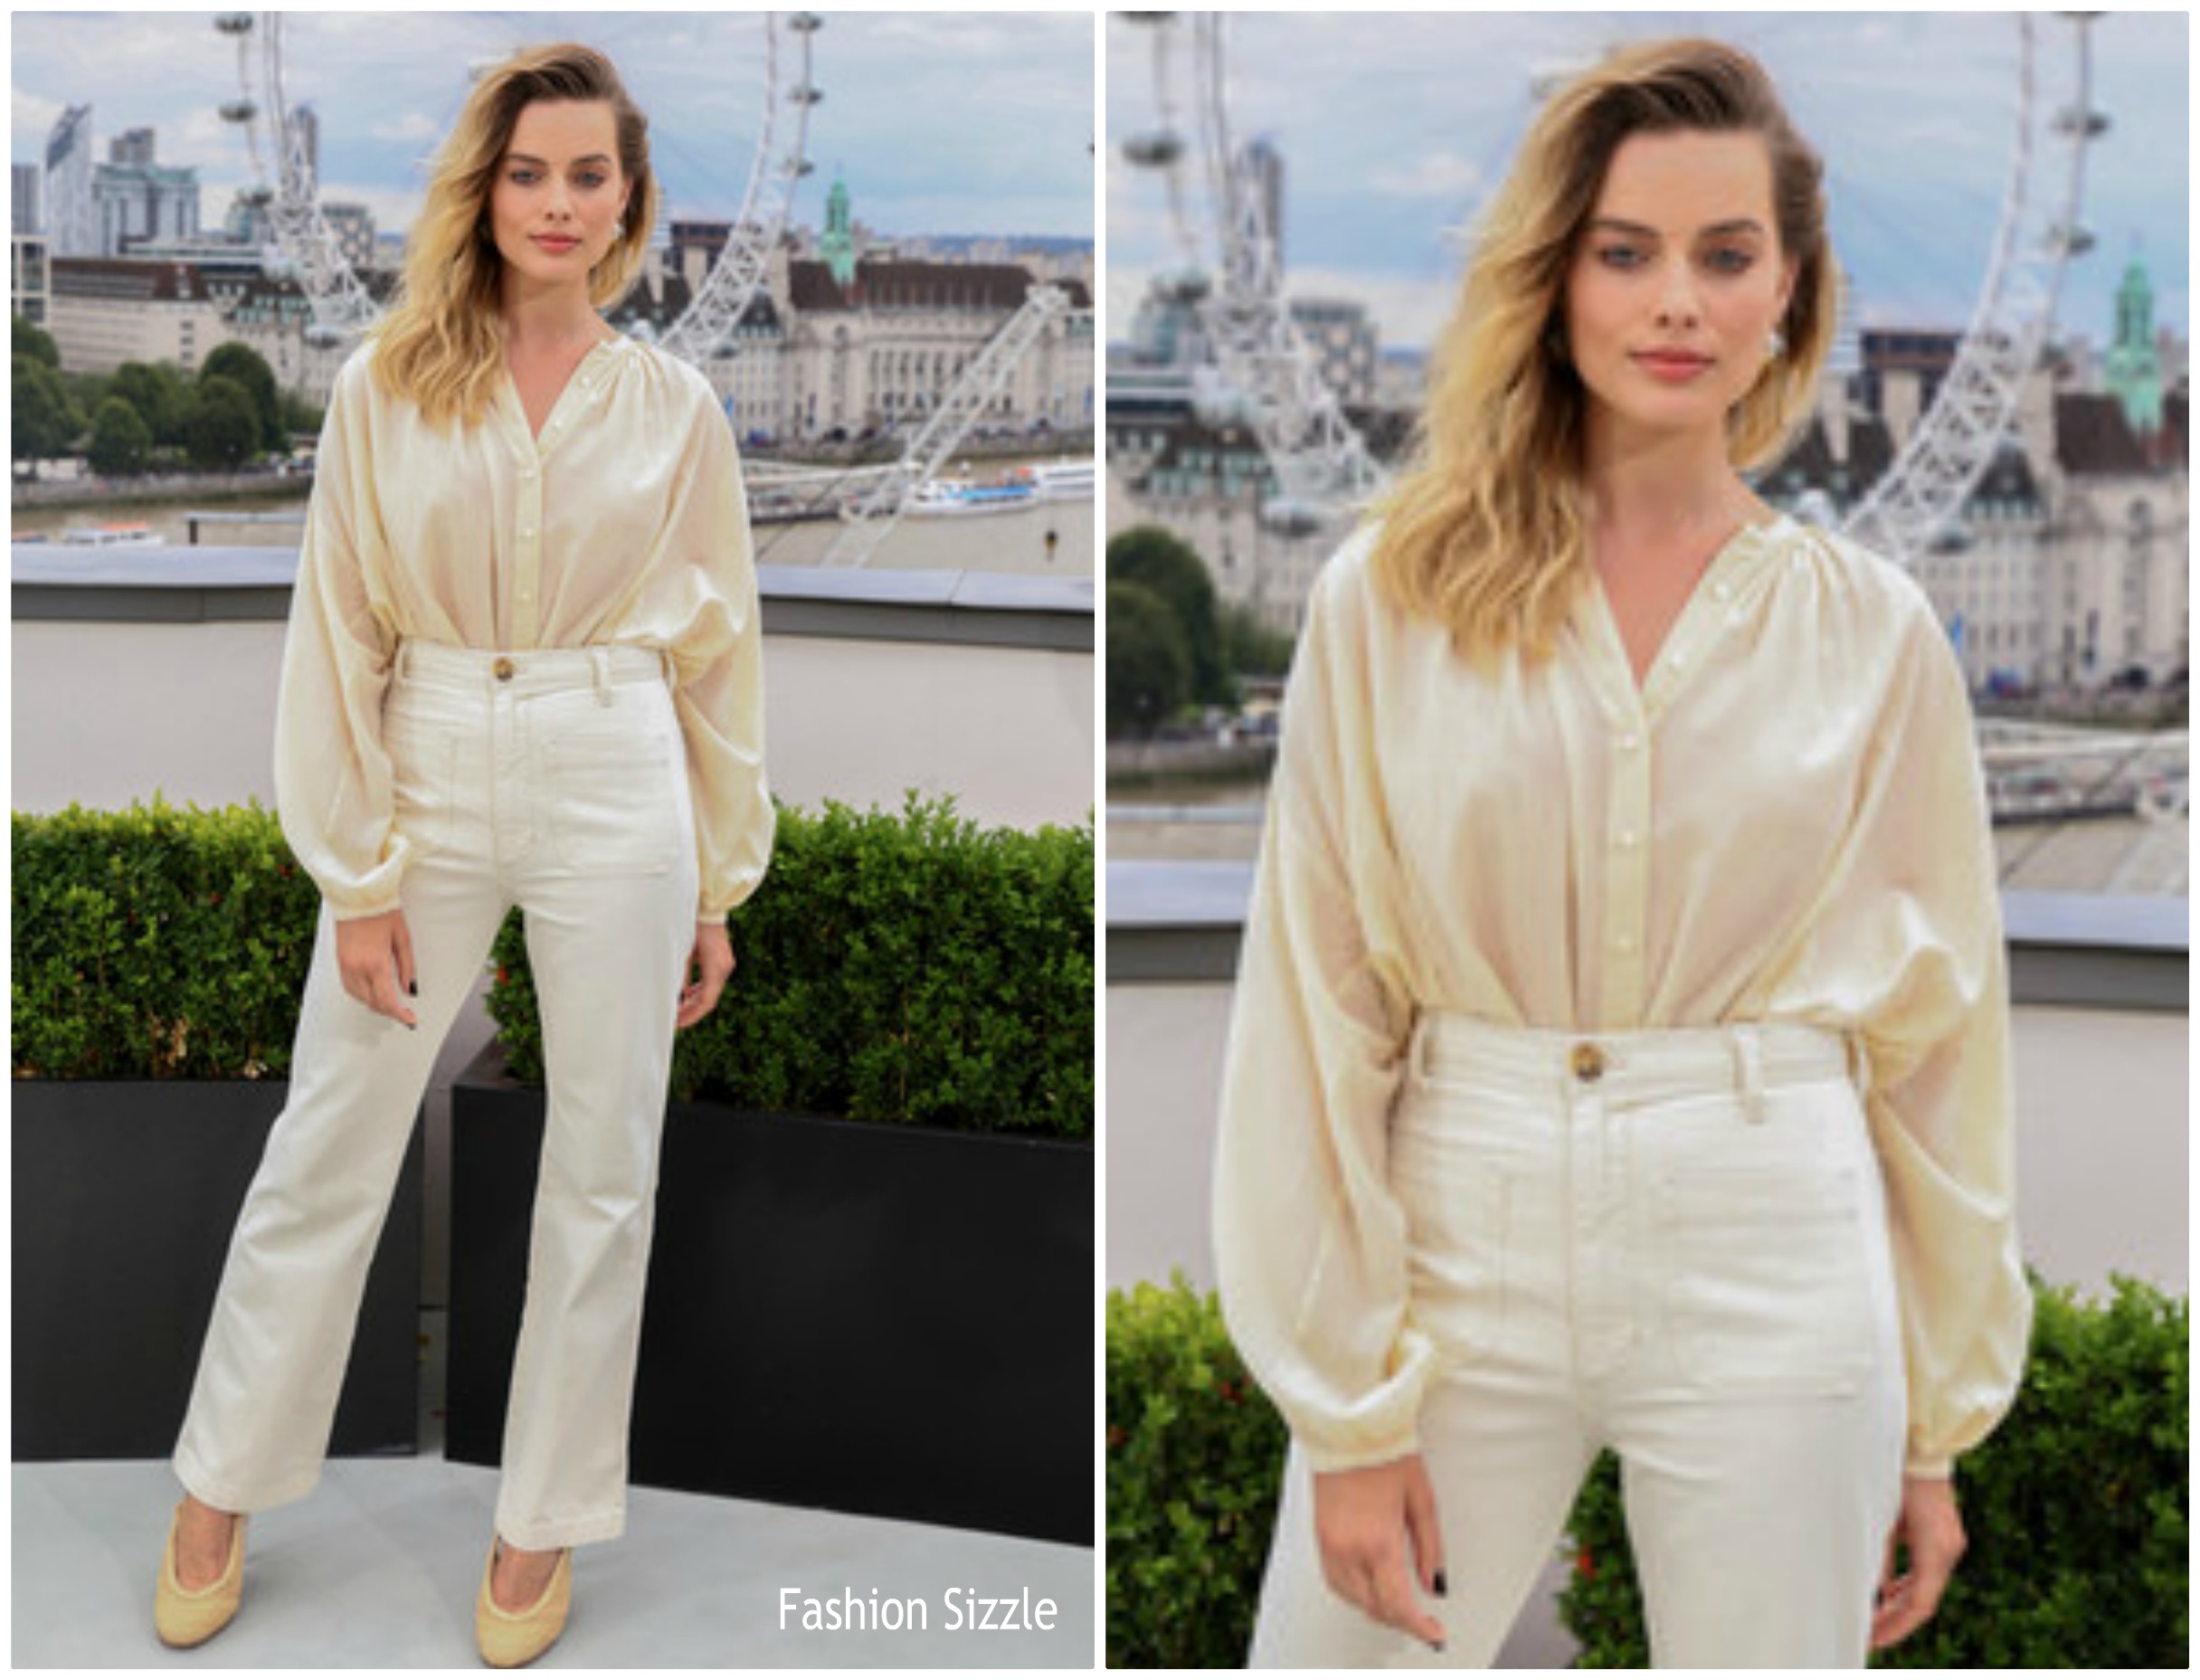 Margot Robbie In Doen @ “Once Upon A Time In Hollywood” London Photocall